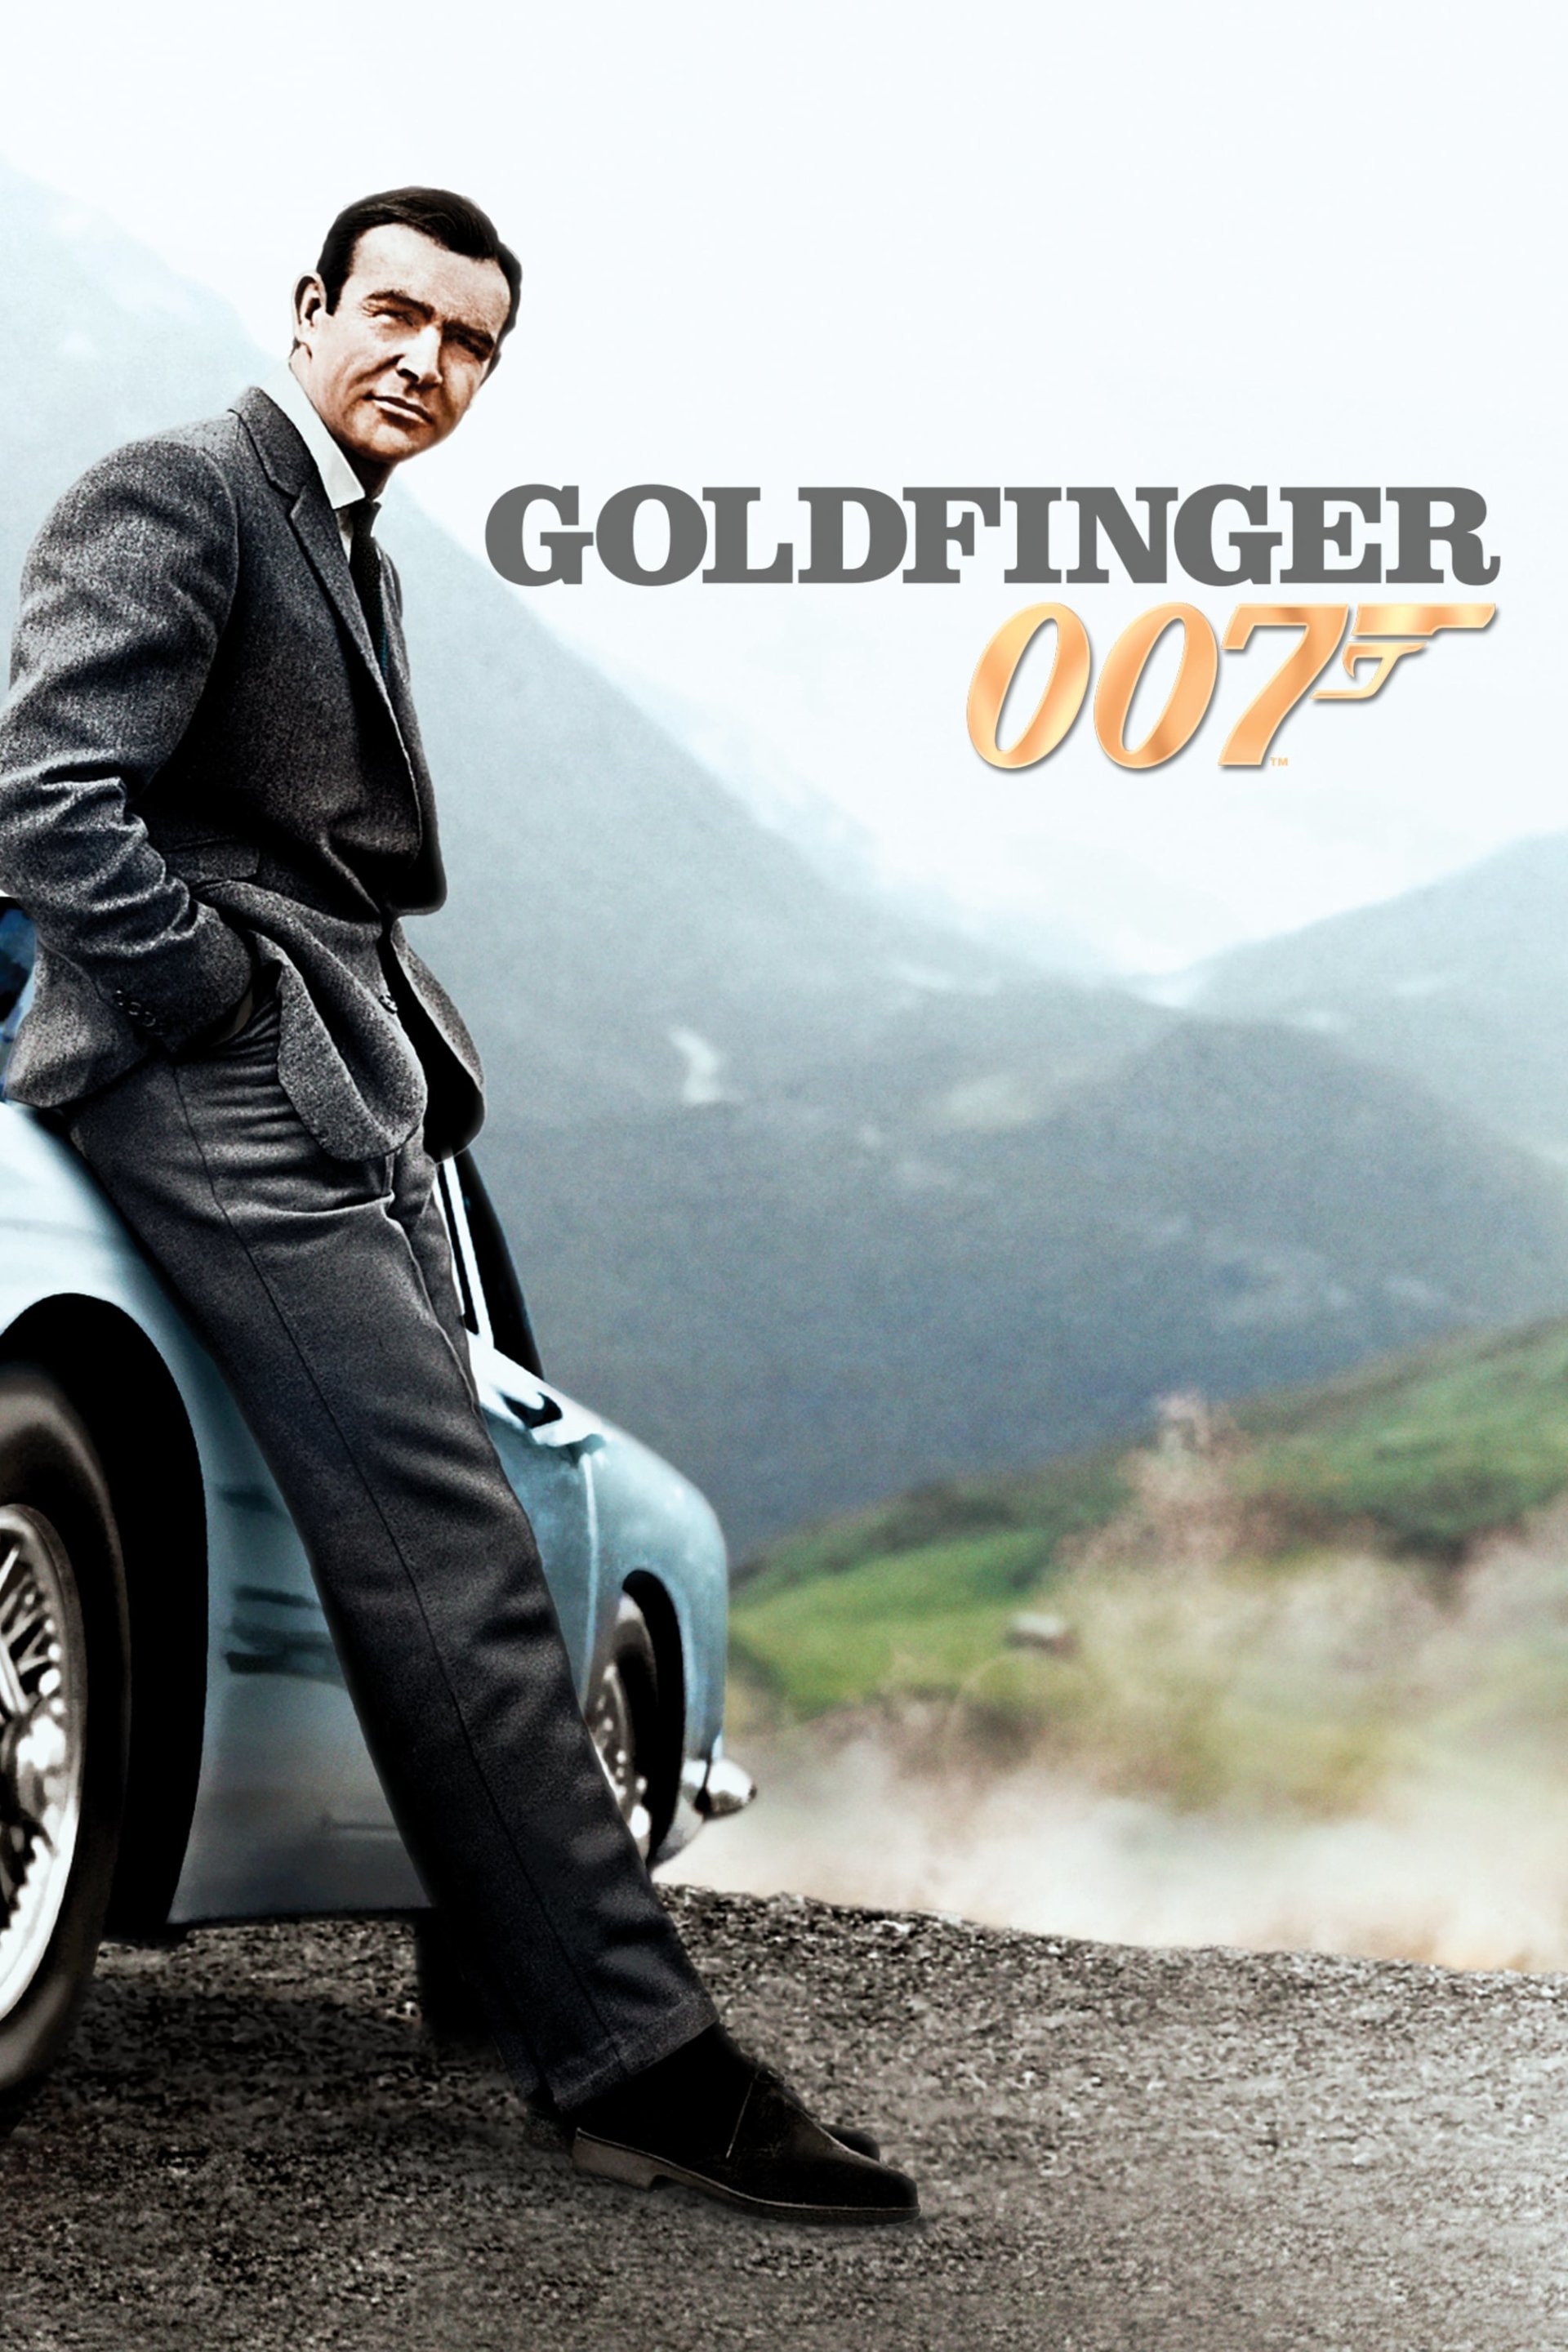 Goldfinger Movie Poster Id 388934 Image Abyss 9648